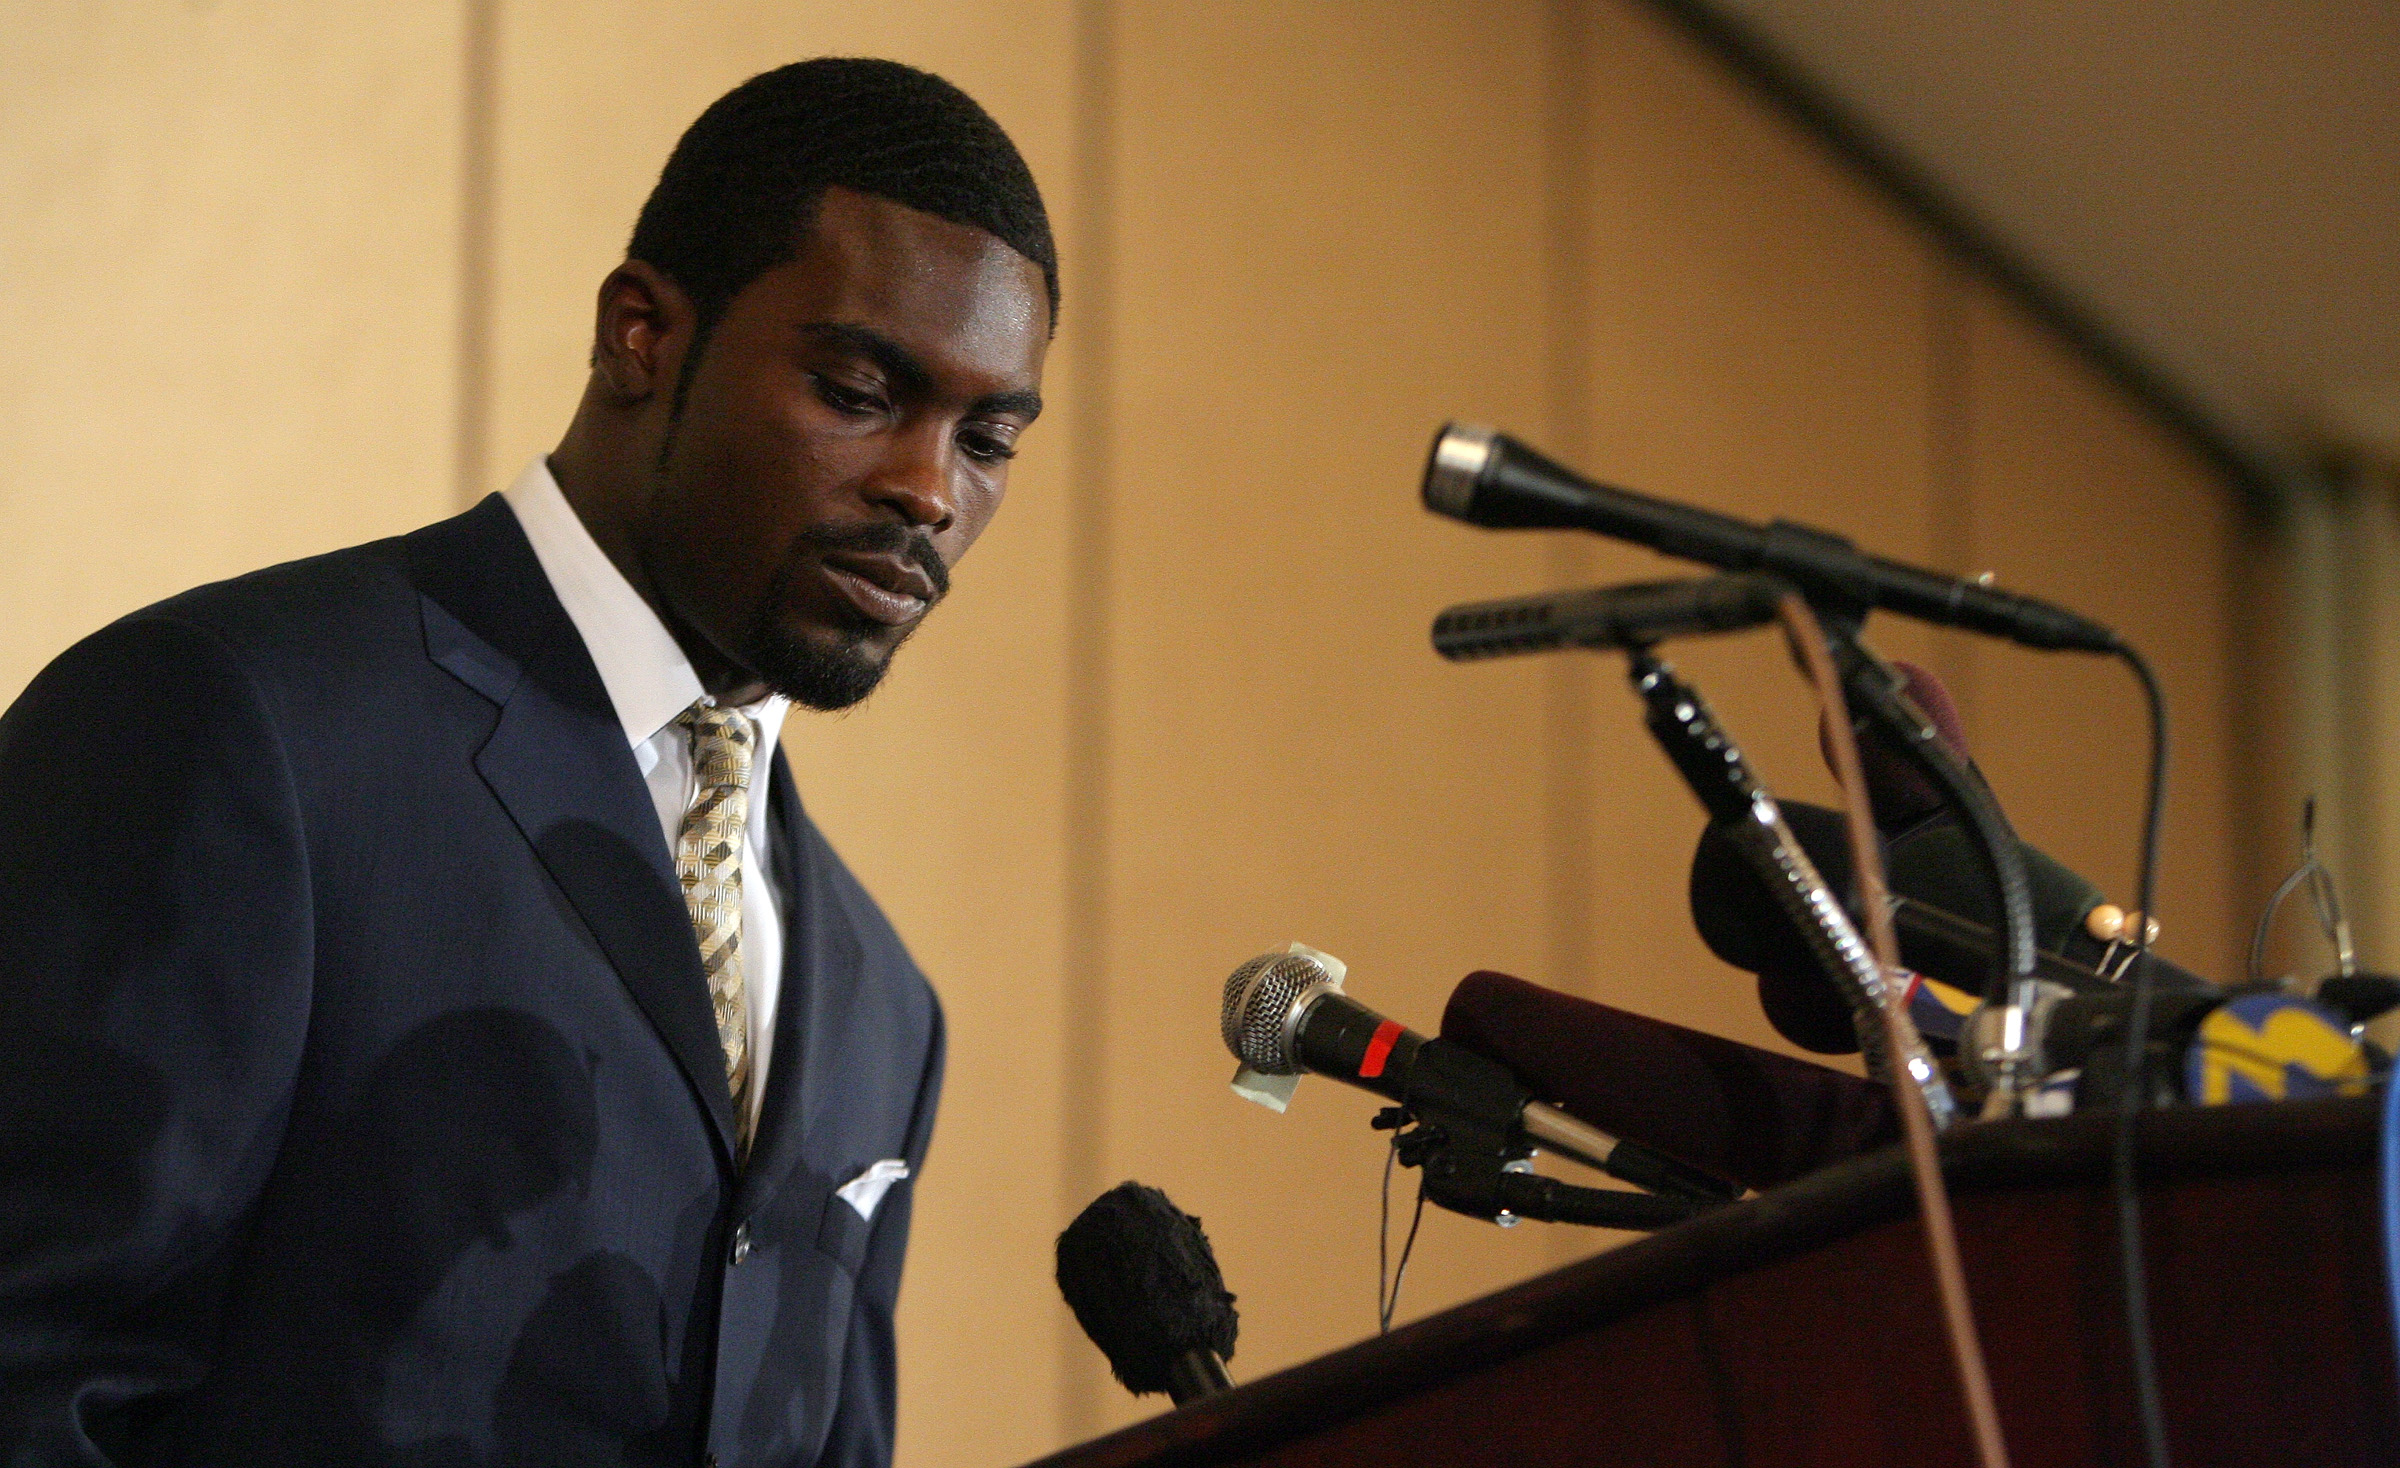 The bizarre times of Michael Vick: From All-Pro to prison